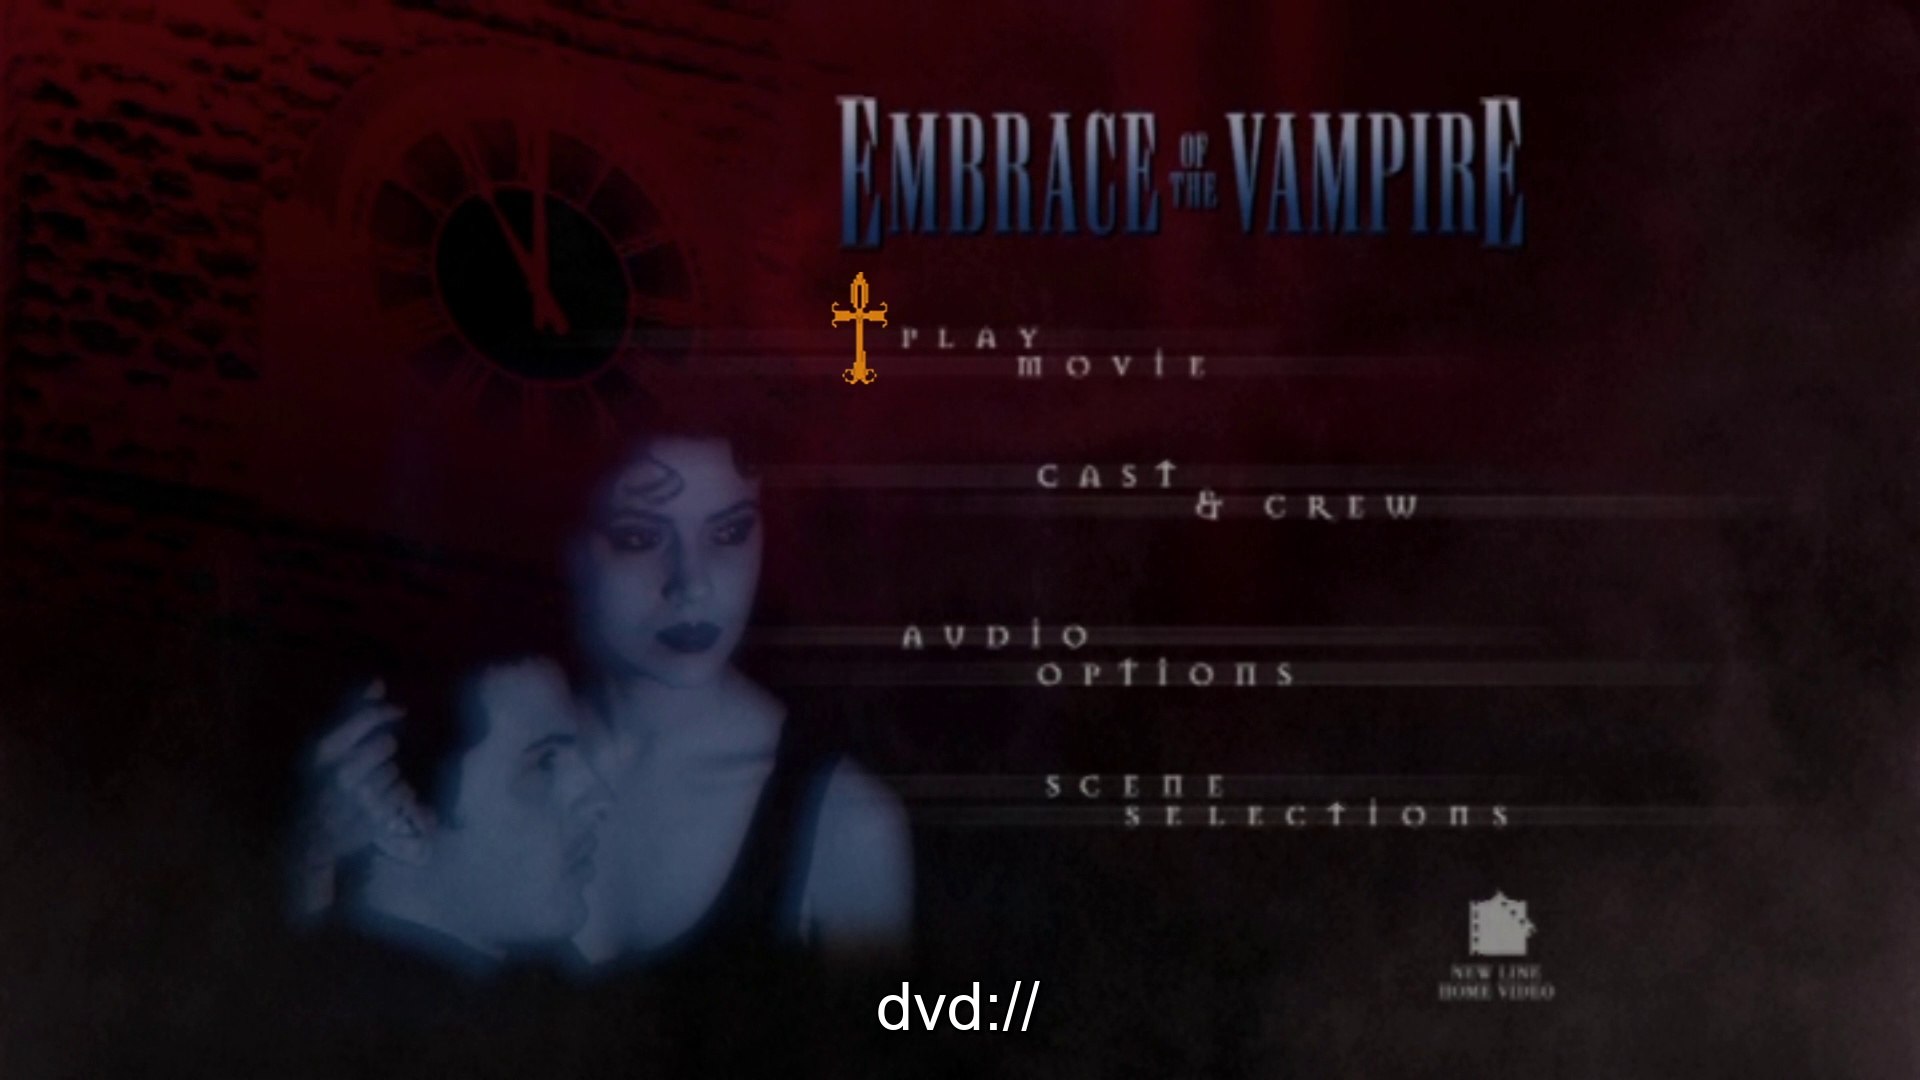 Opening To Embrace Of A Vampire 1999 04 Dvd Hd Video Dailymotion